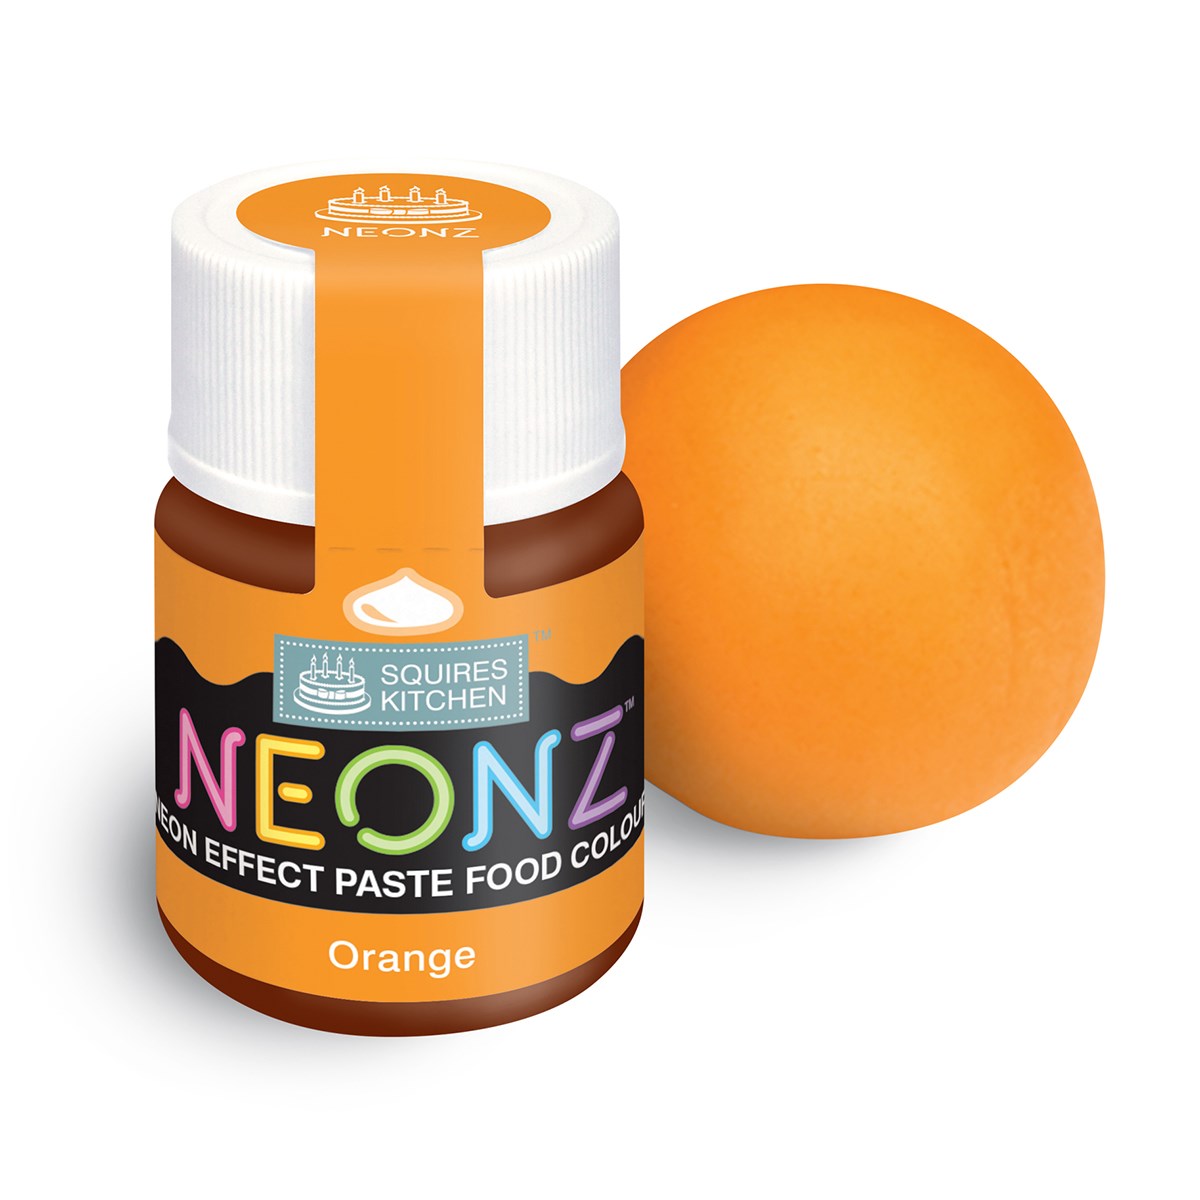 Squires Kitchen Neonz Neon Effect Concentrated Paste Food Colouring - 20g - Orange